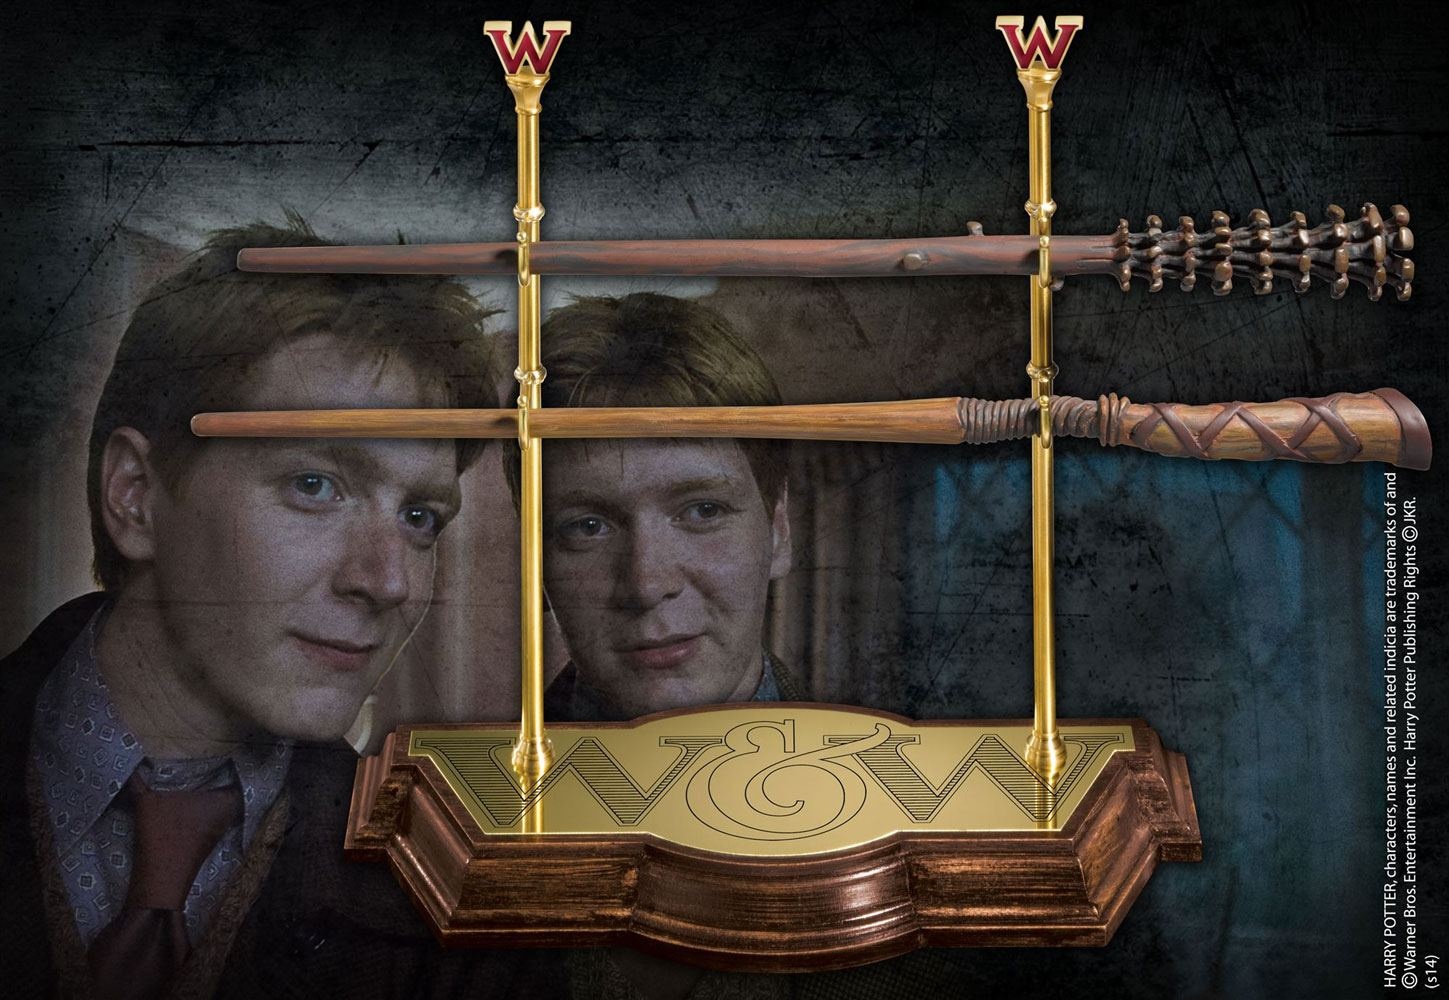 https://cdn.webshopapp.com/shops/343516/files/443606647/the-noble-collection-harry-potter-wand-weasley-twi.jpg